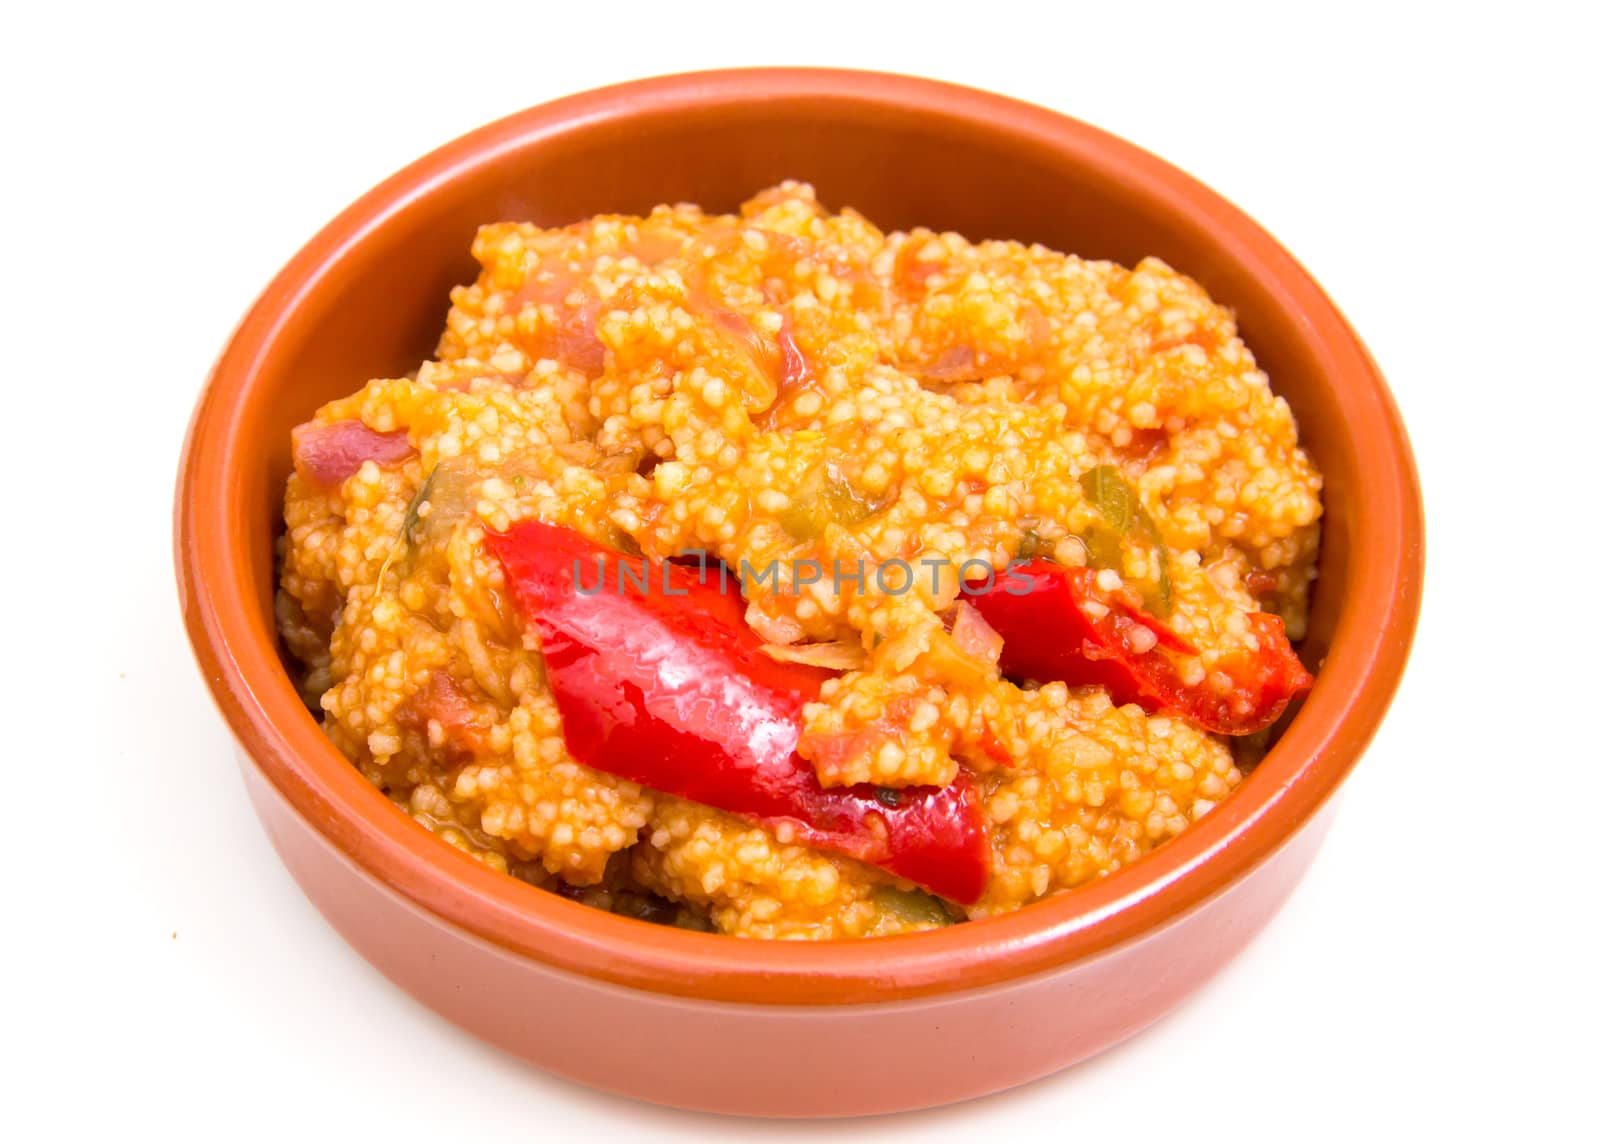 Couscous with vegetables on a bowl over white background